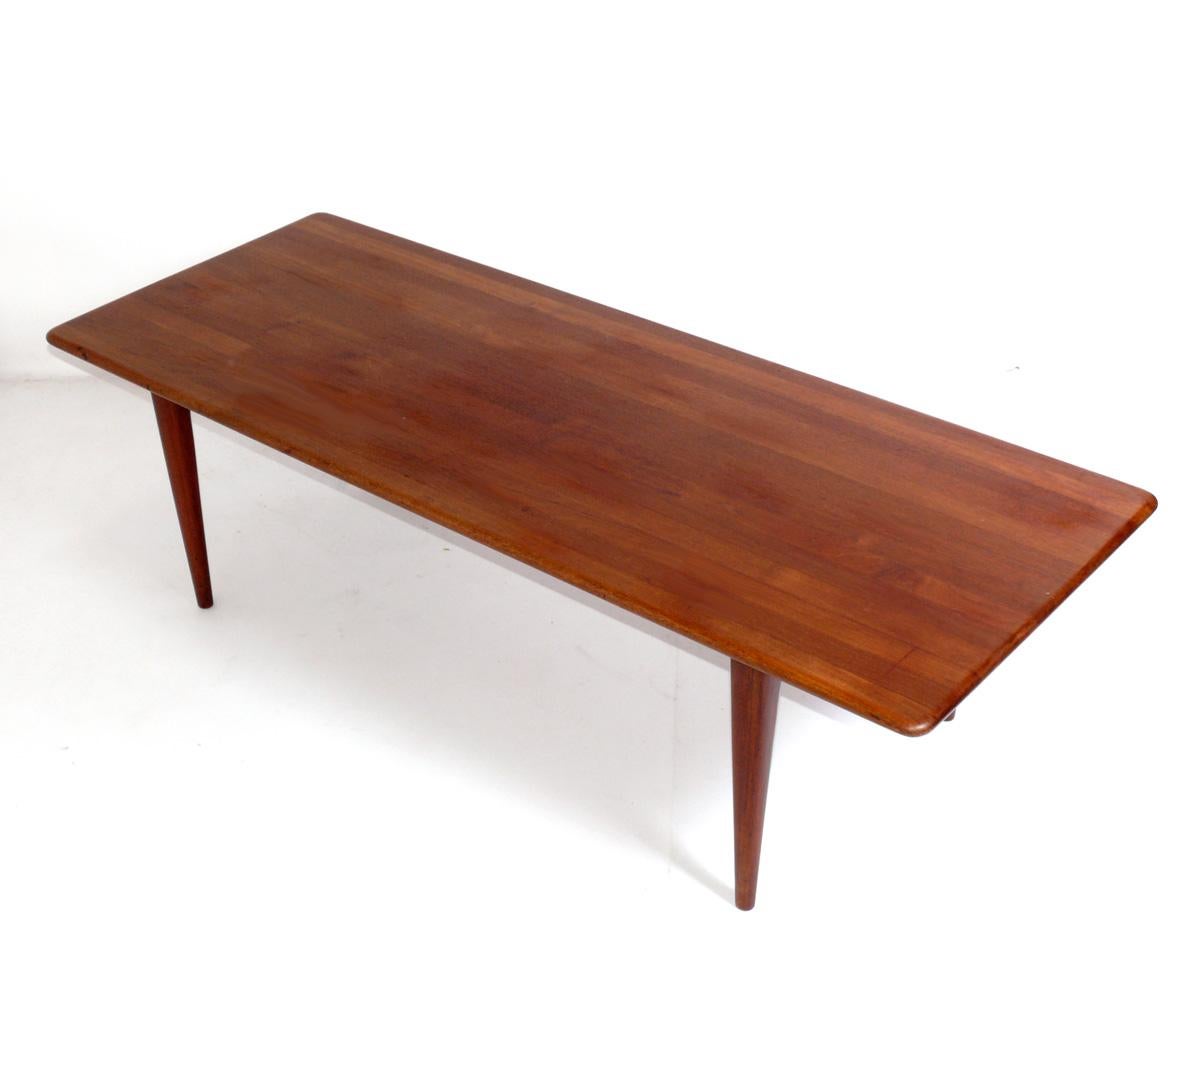 Danish Modern teak coffee table, Denmark, circa 1960s. This table is currently being refinished and will look incredible when completed. The price noted includes refinishing. It measures an impressive 64.75